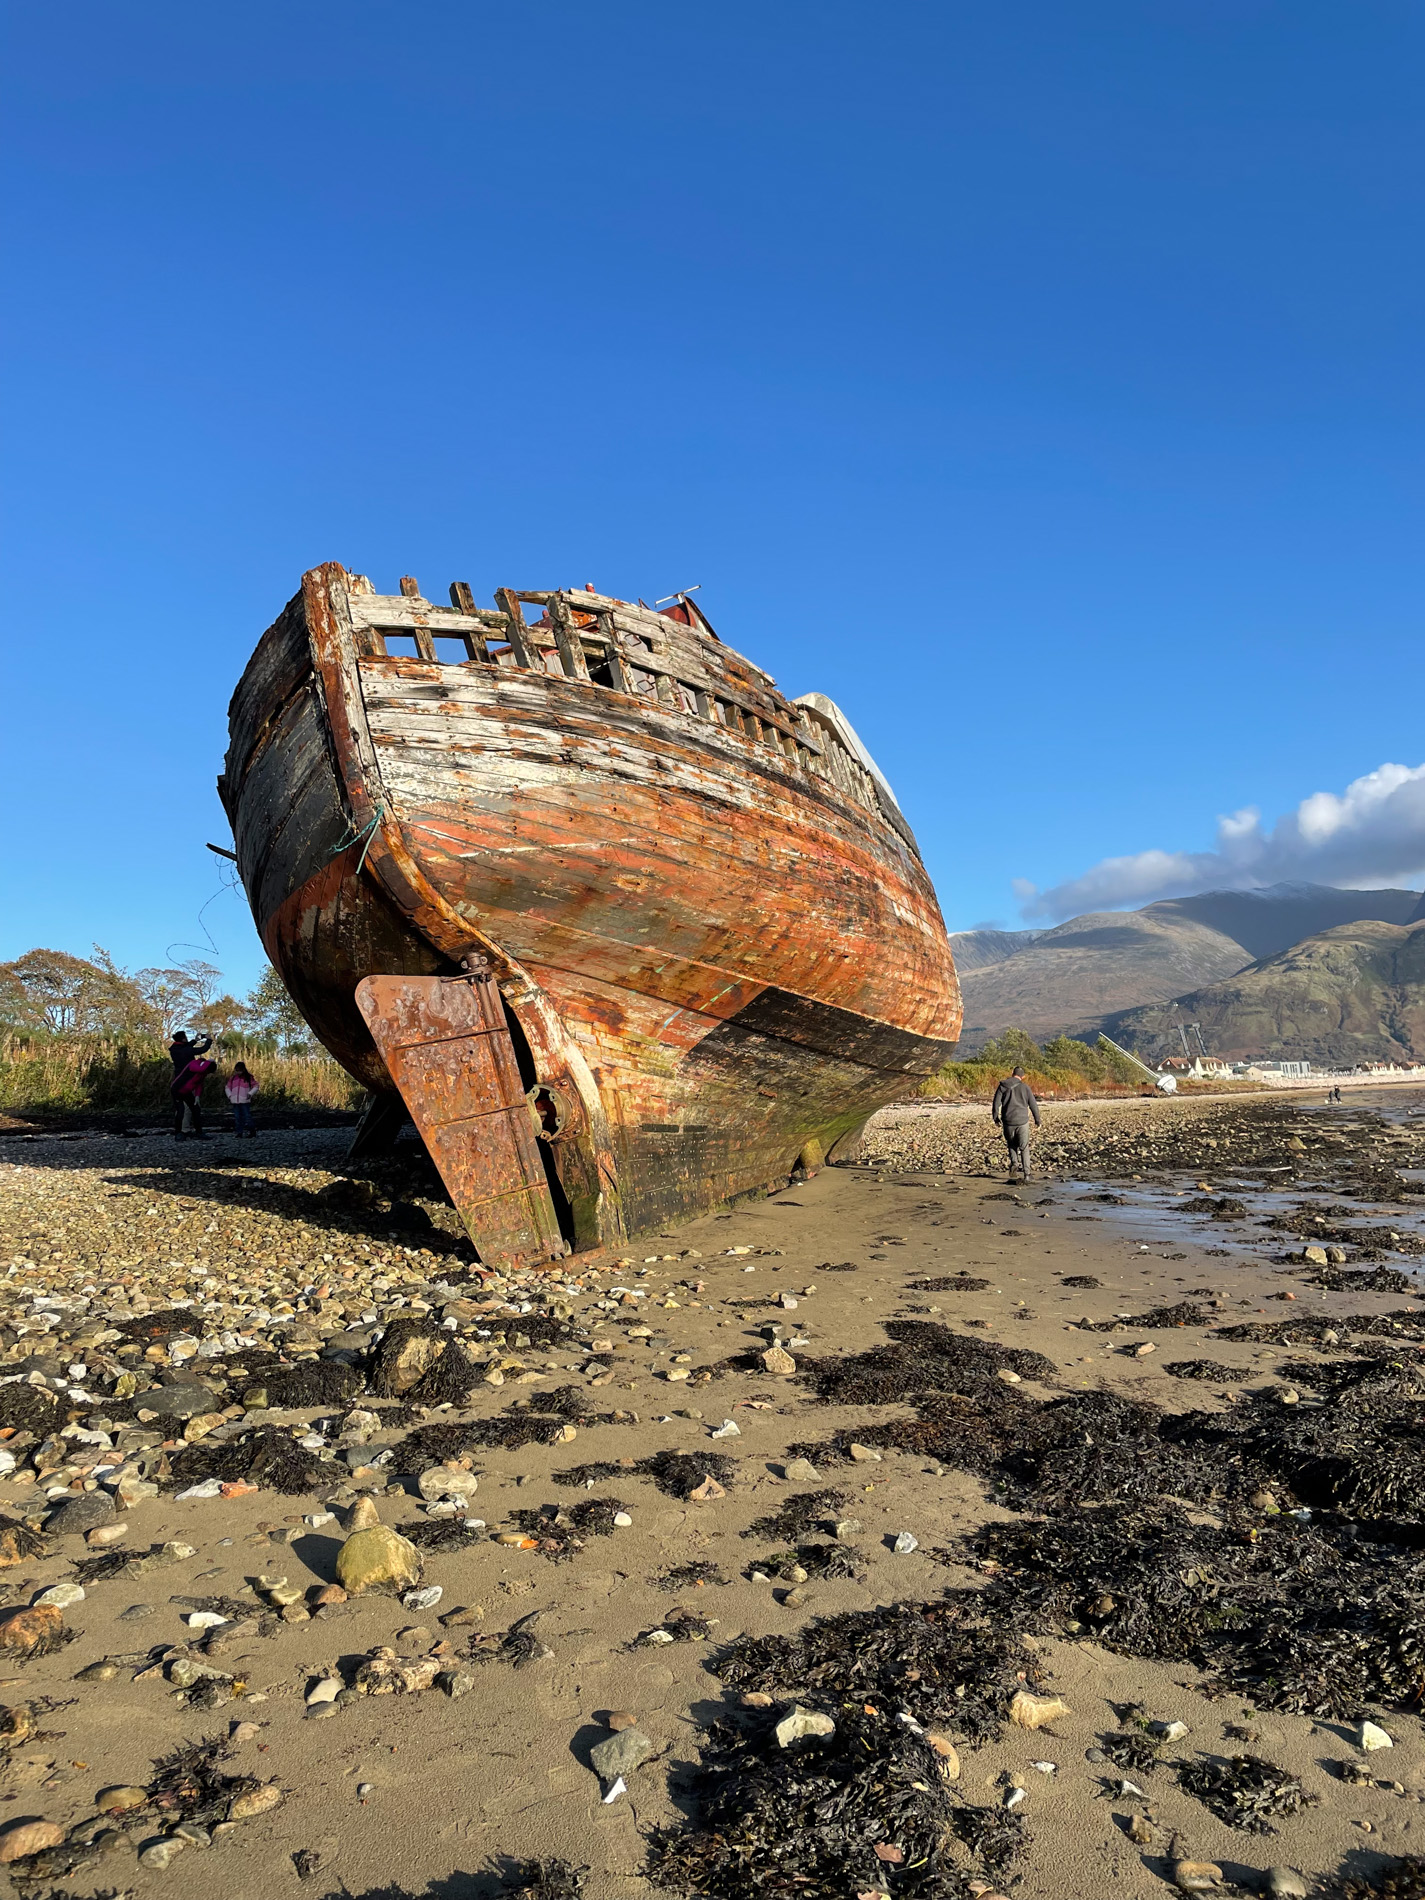 Exploring the Corpach Shipwreck on a Scotland Road Trip